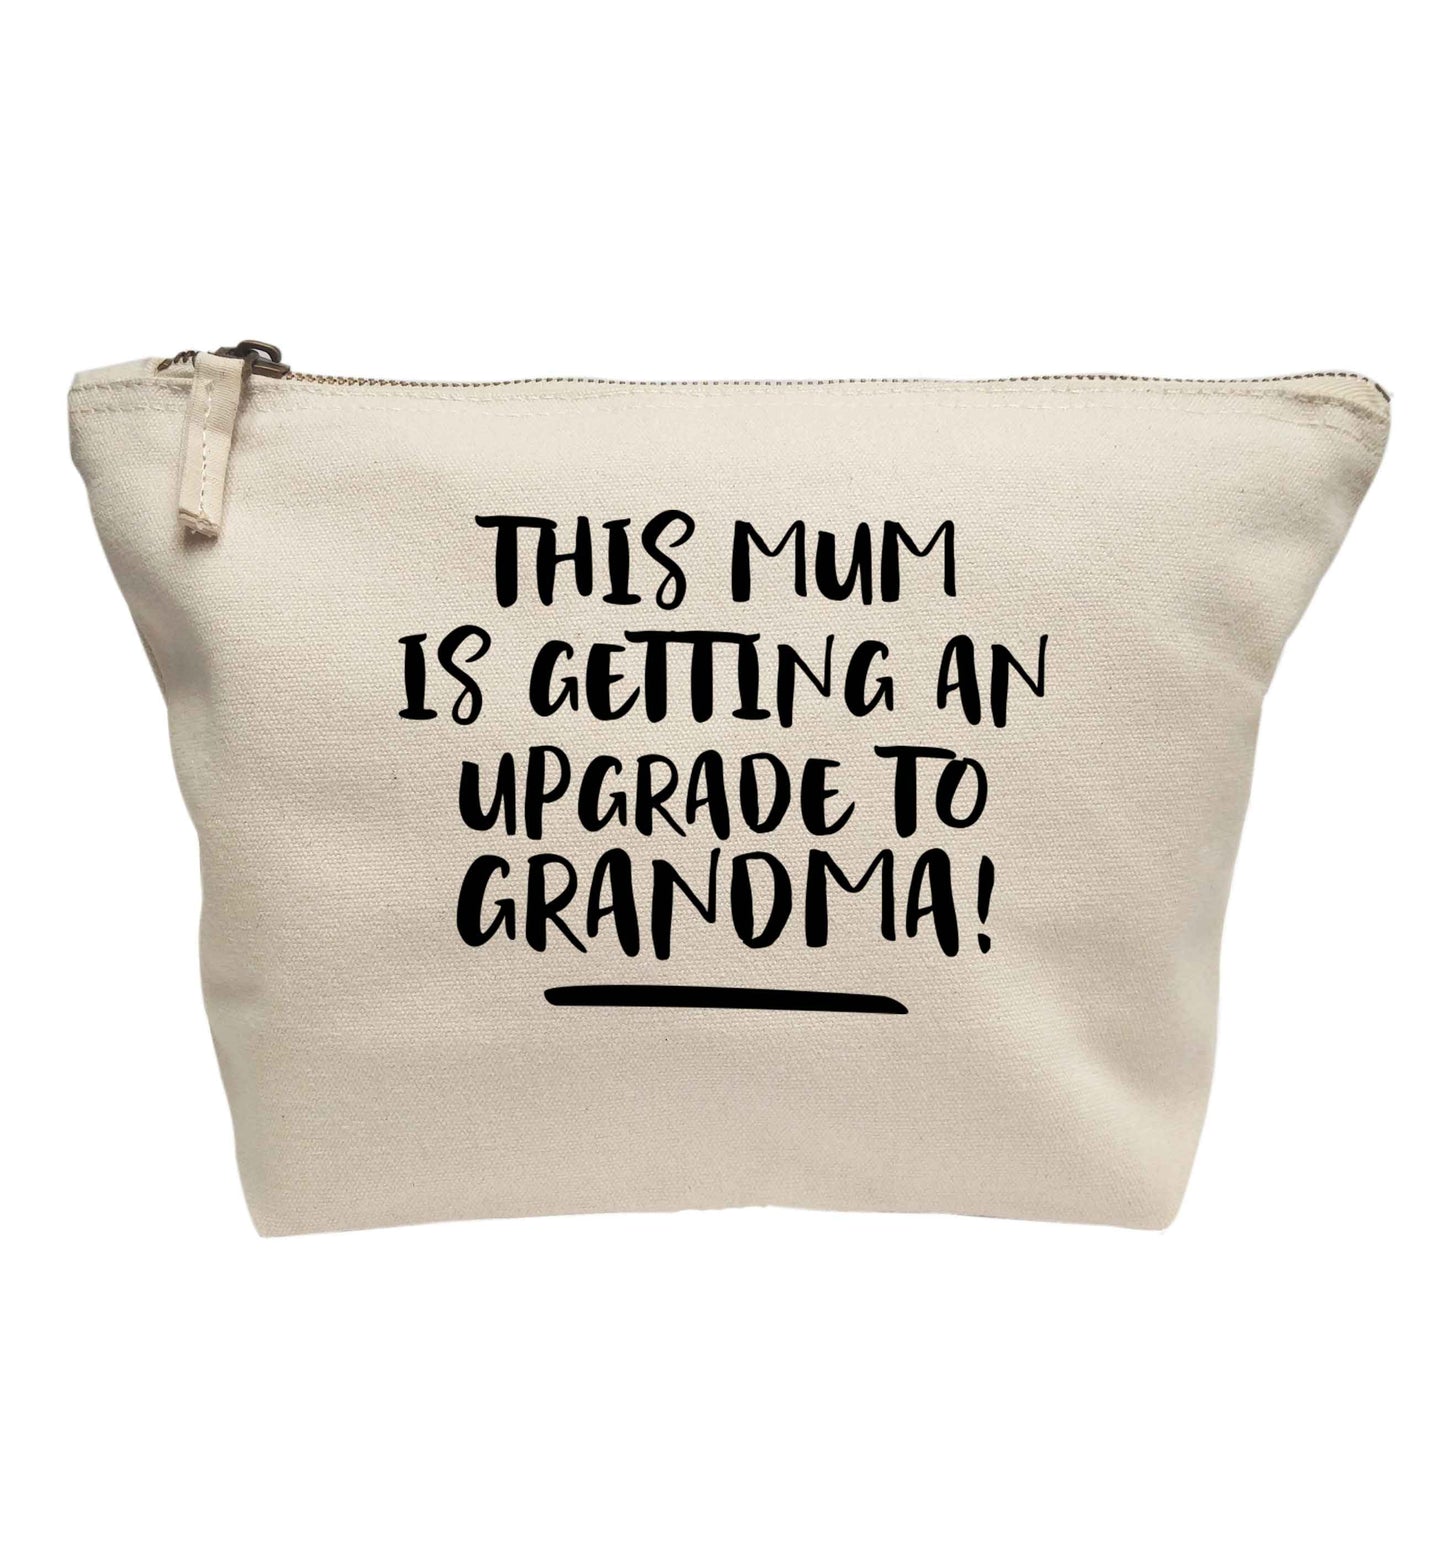 This mum is getting an upgrade to grandma! | makeup / wash bag